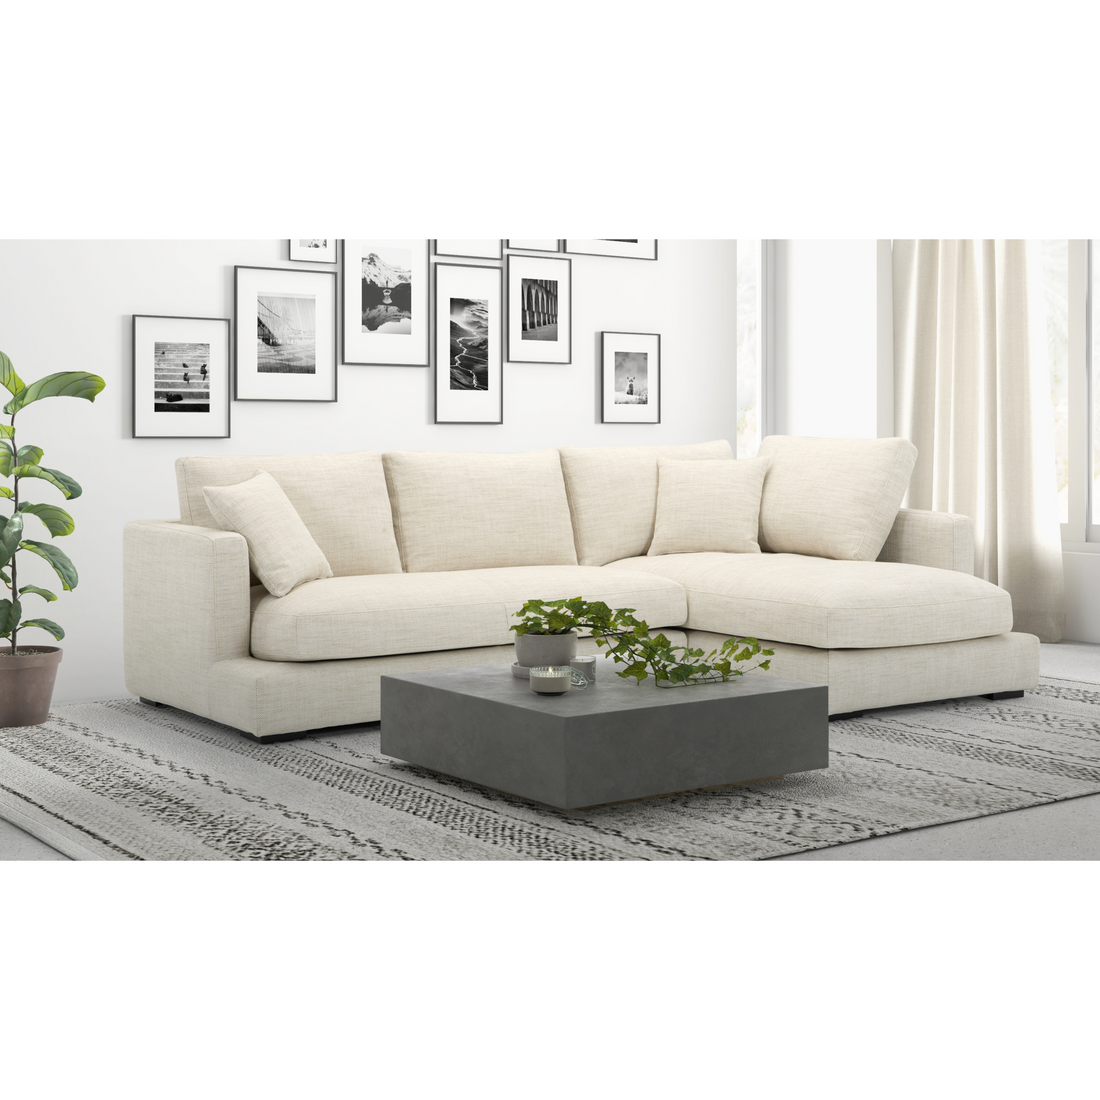 Beige sectional roots furniture